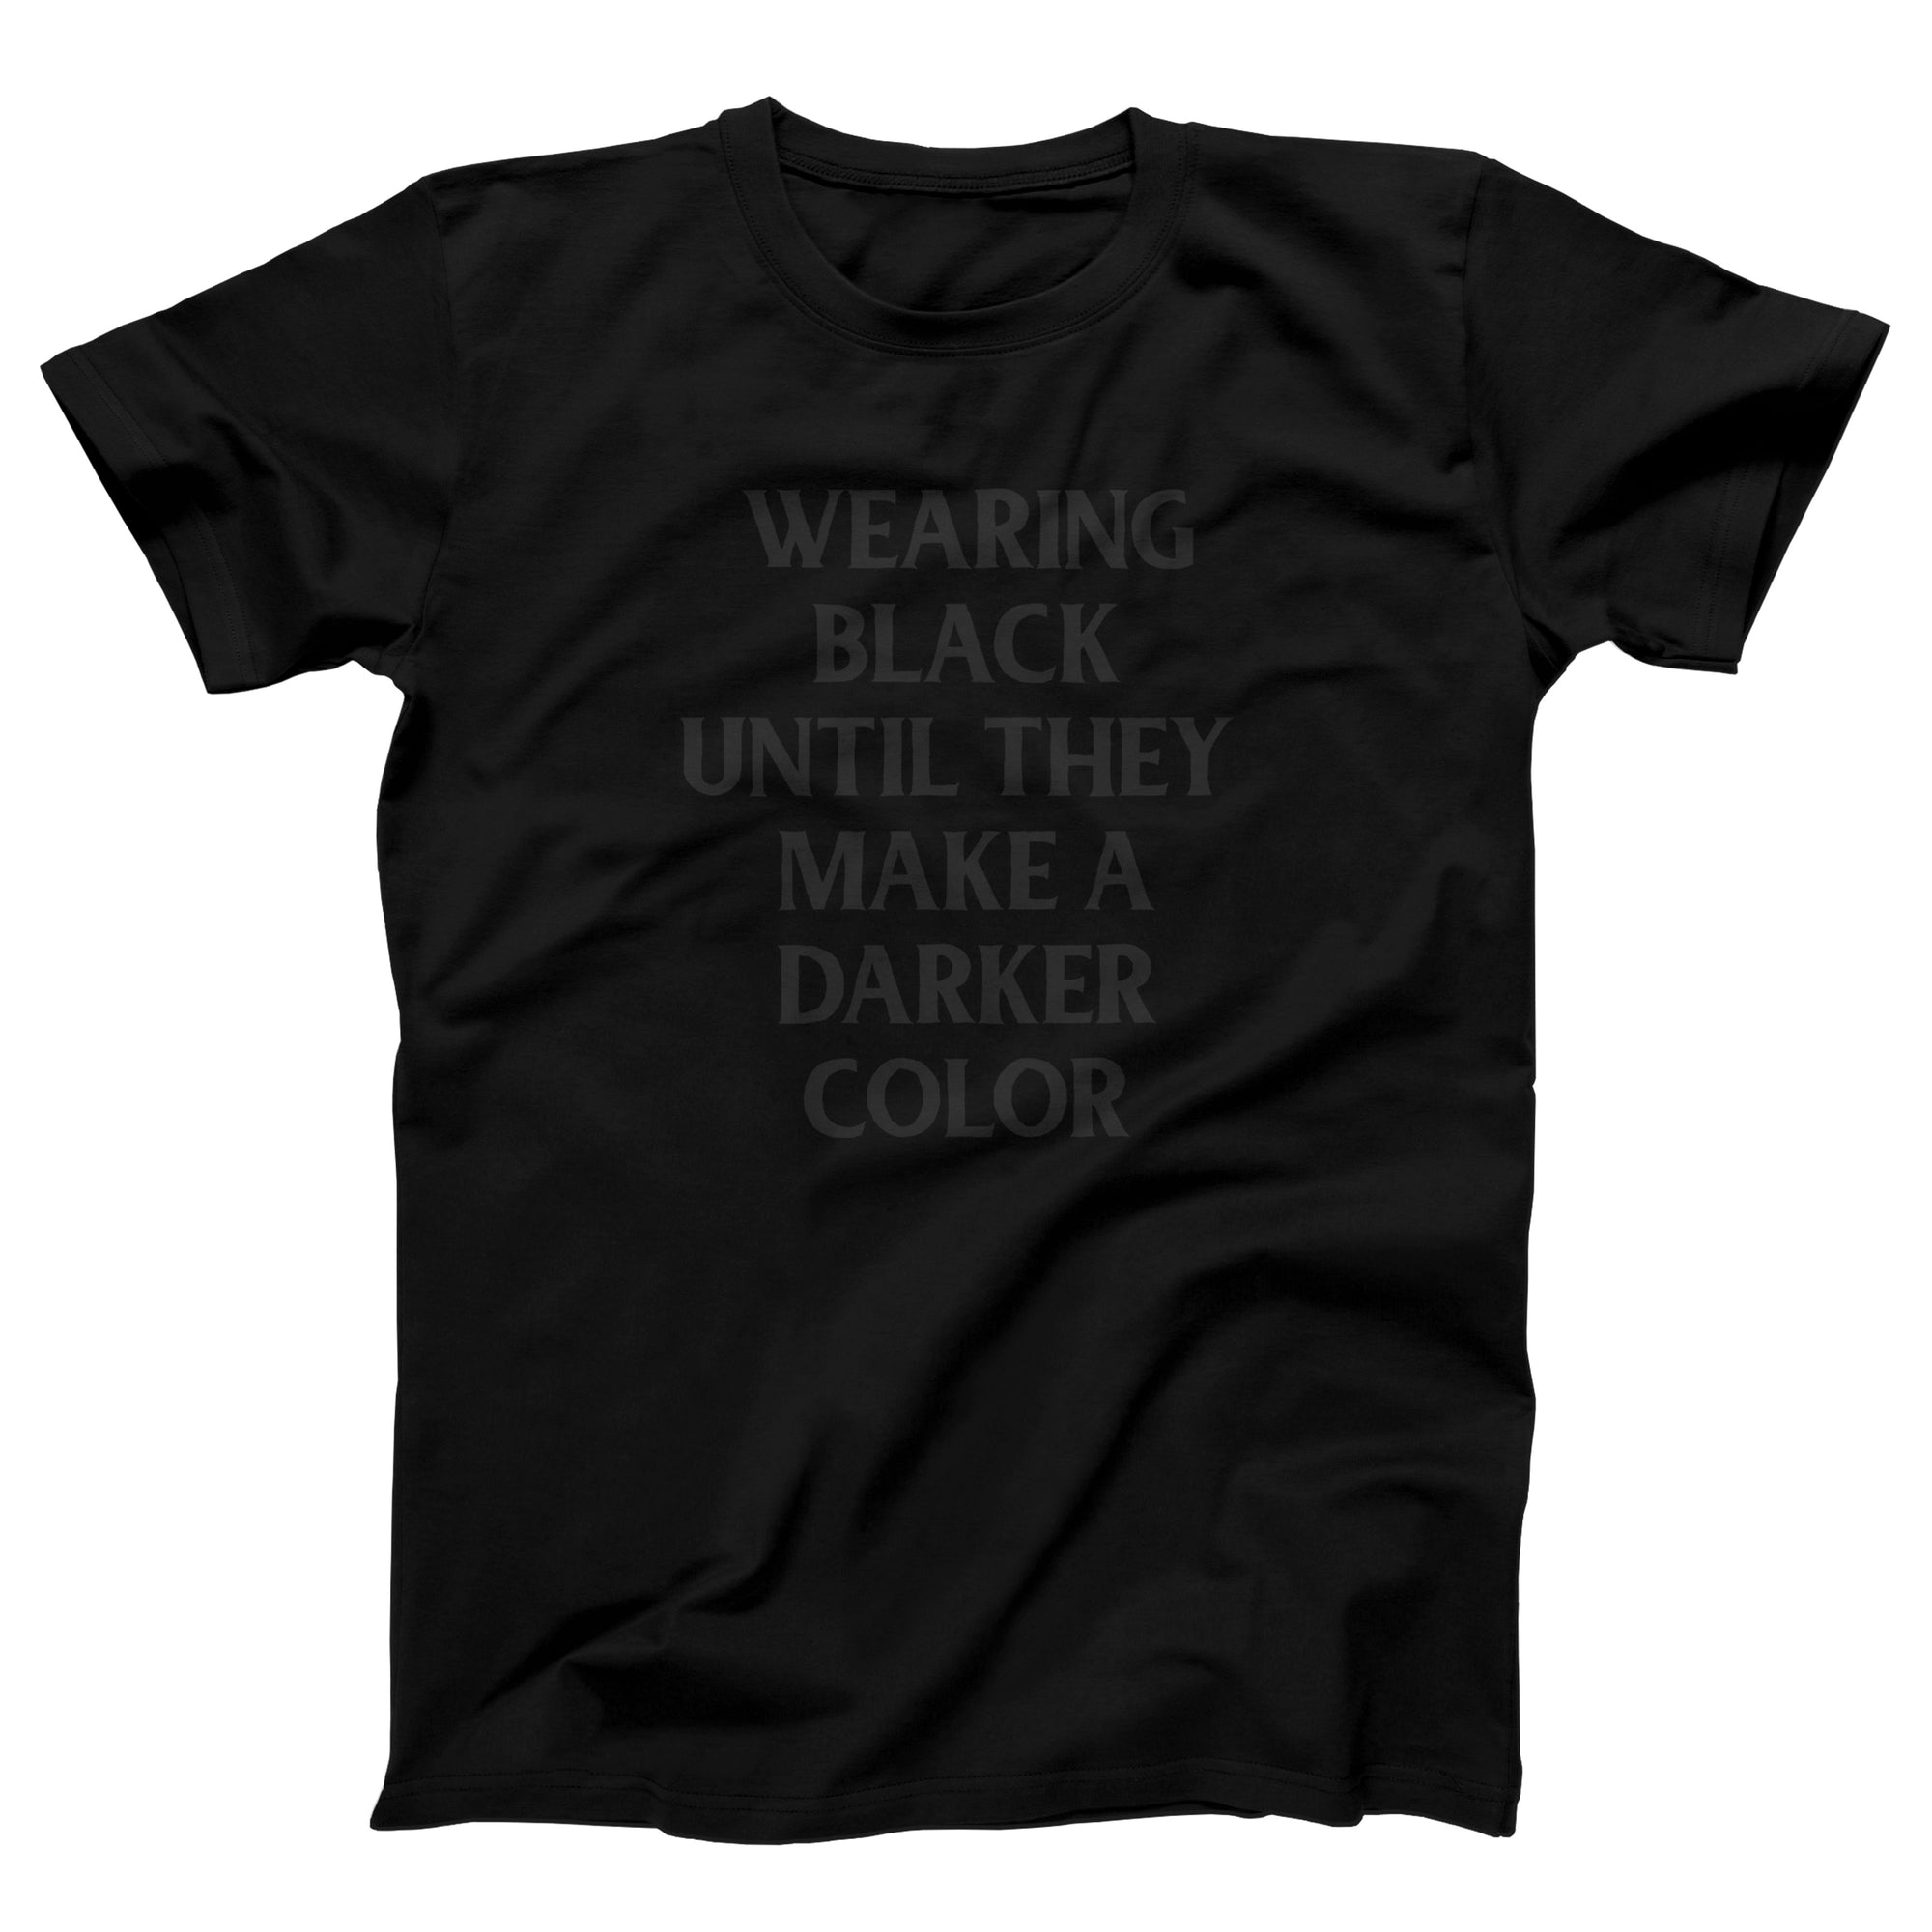 Wearing Black Until They Make A Darker Color Adult Unisex T-Shirt - anishphilip